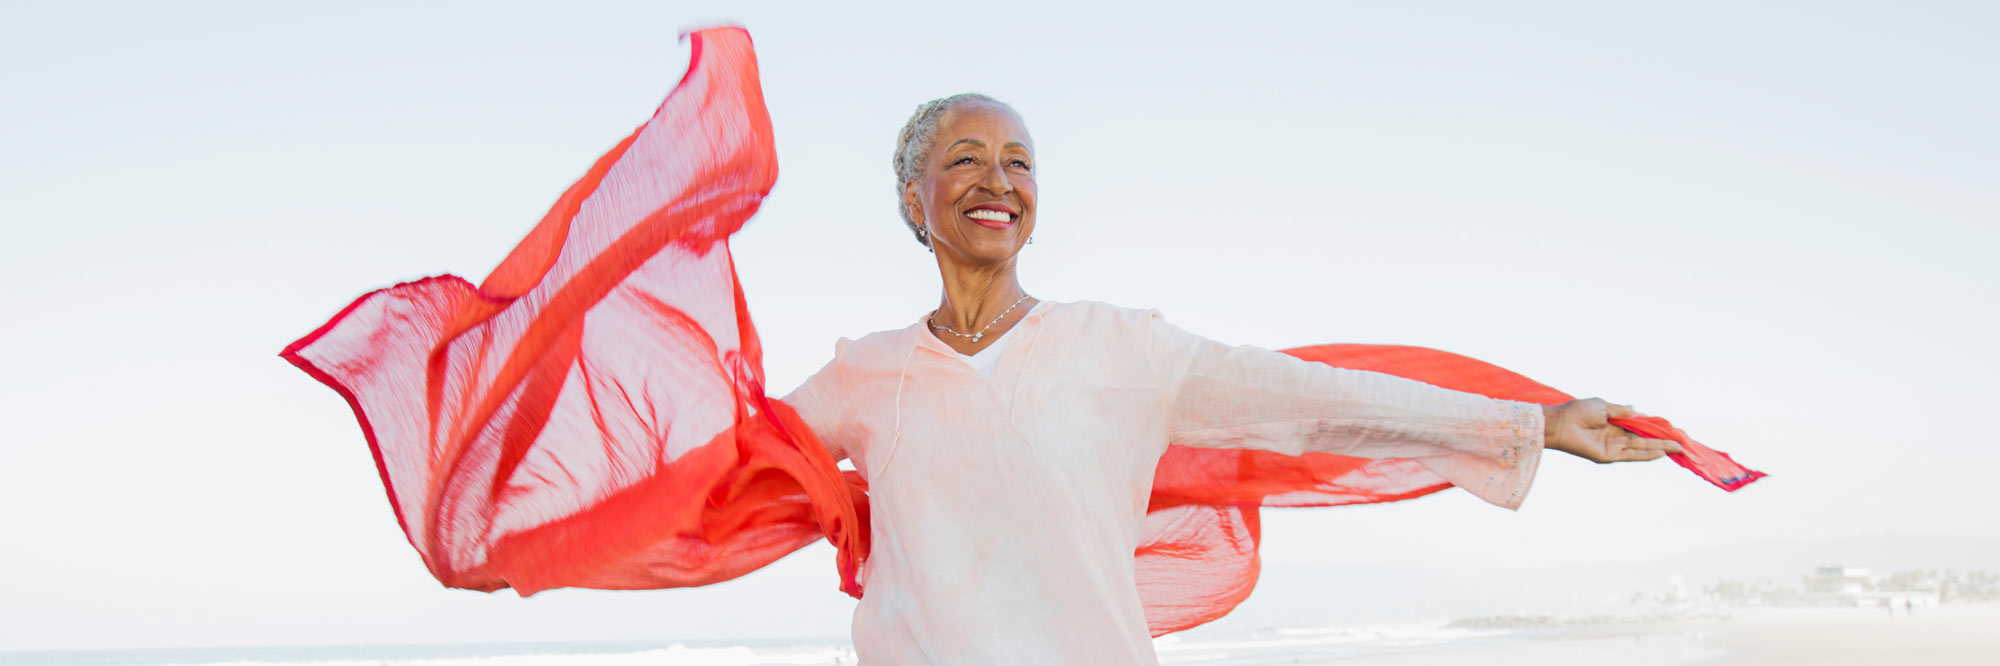 Your ultimate guide to healthy aging